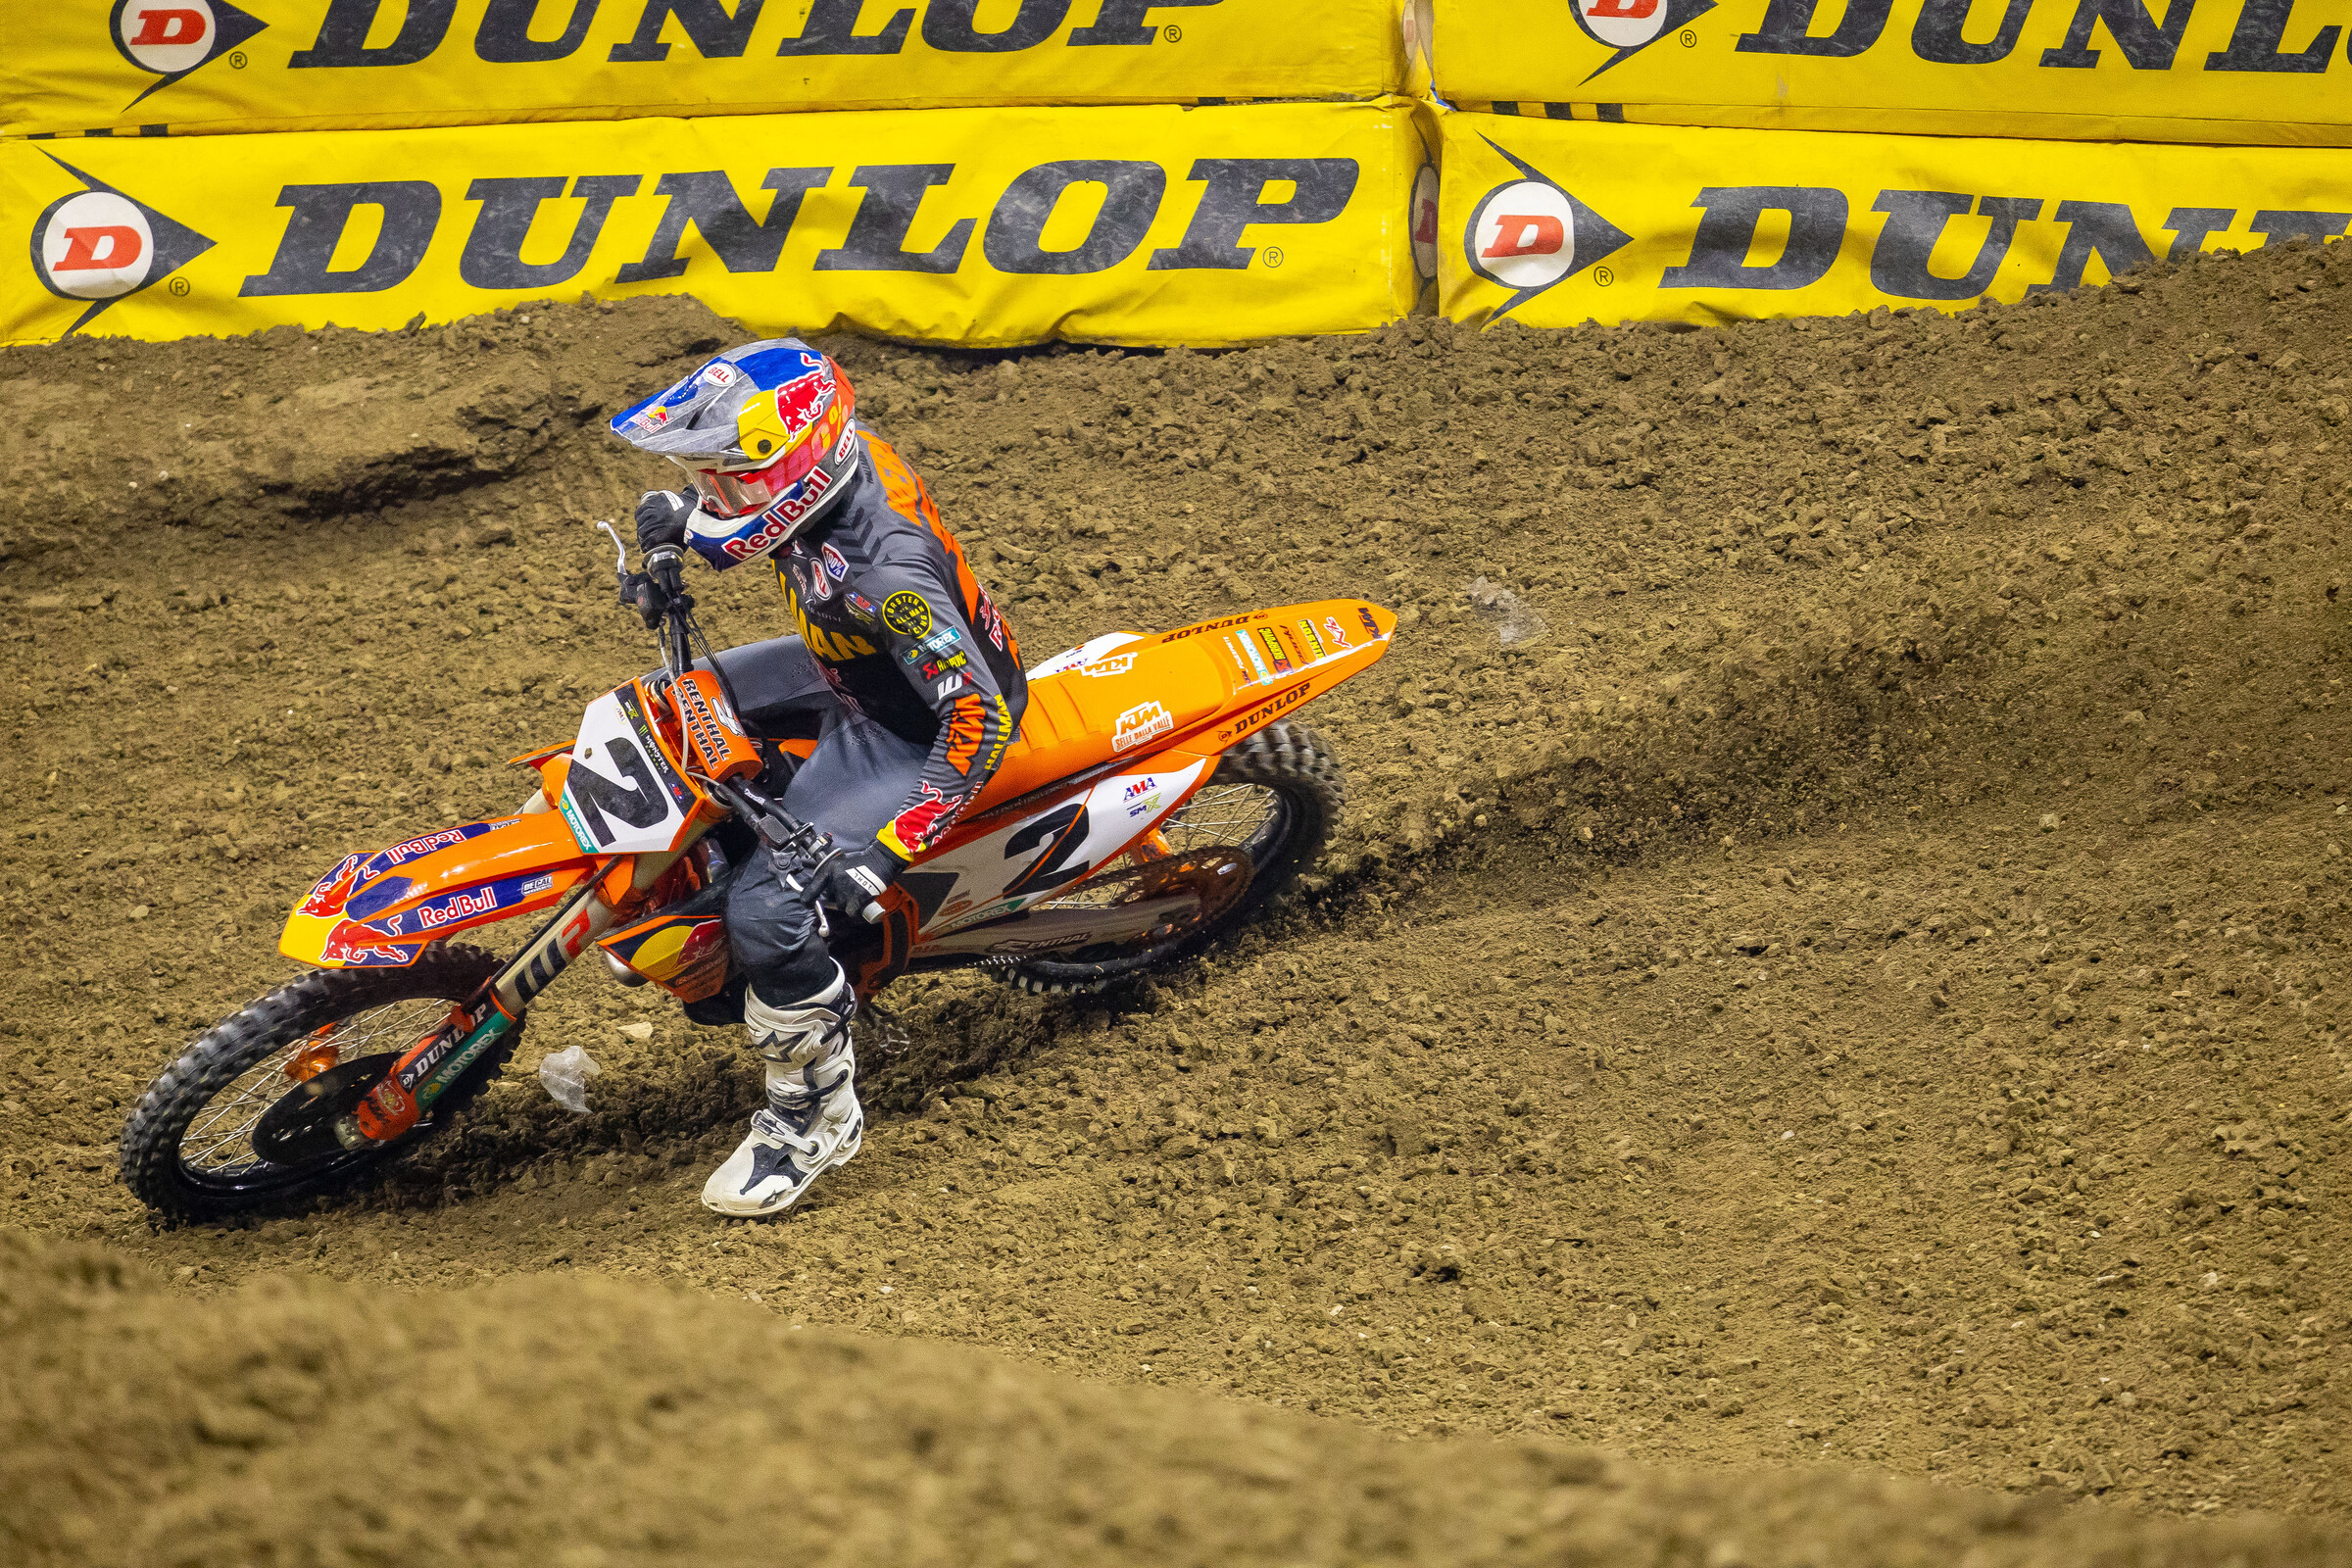 How to Watch/Stream Detroit SX on TV